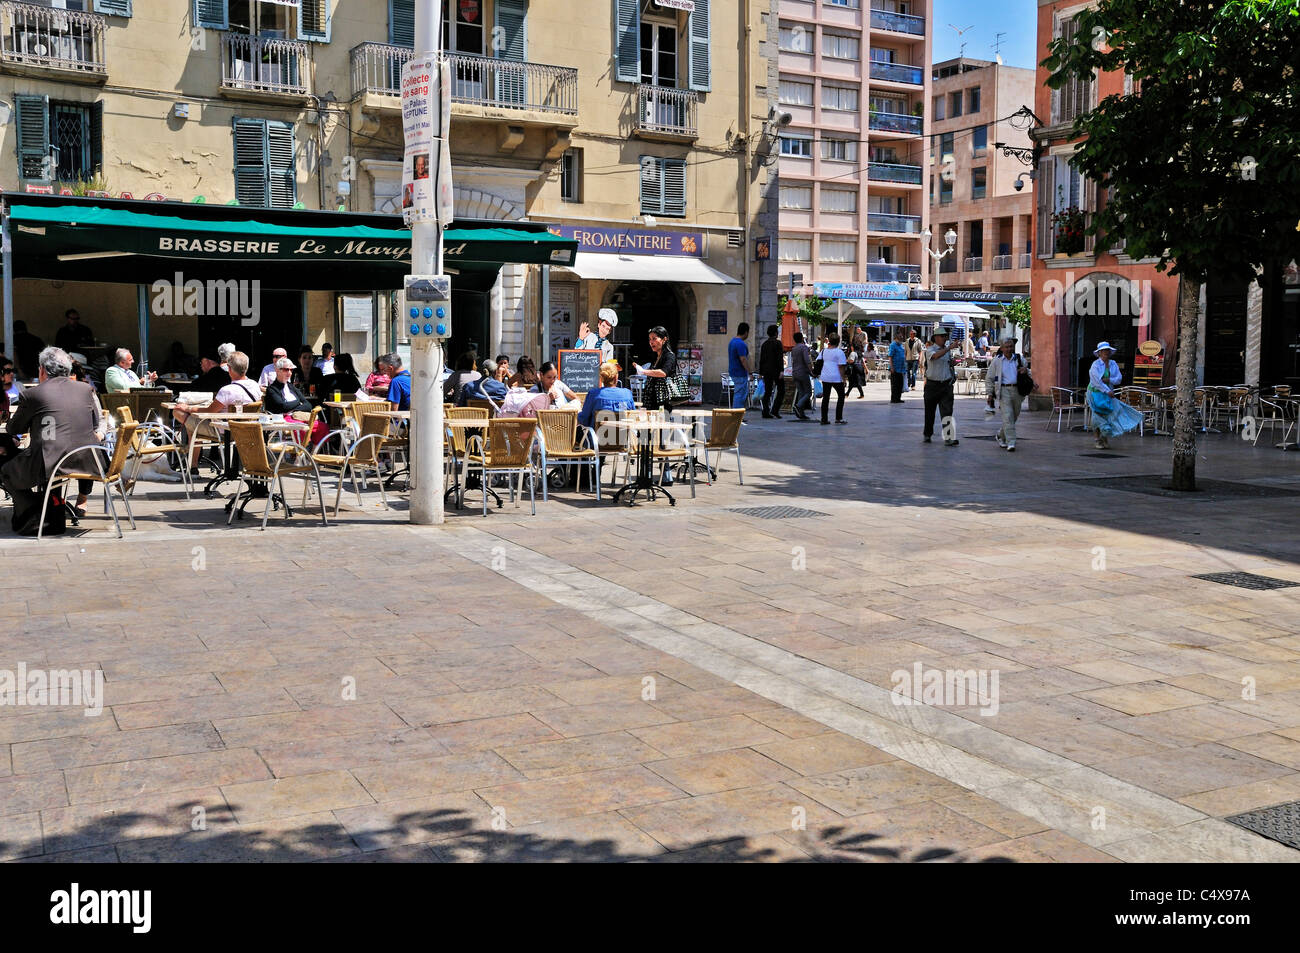 A popular outdoor brasserie in Place Louis Blanc, Toulon, France Stock Photo